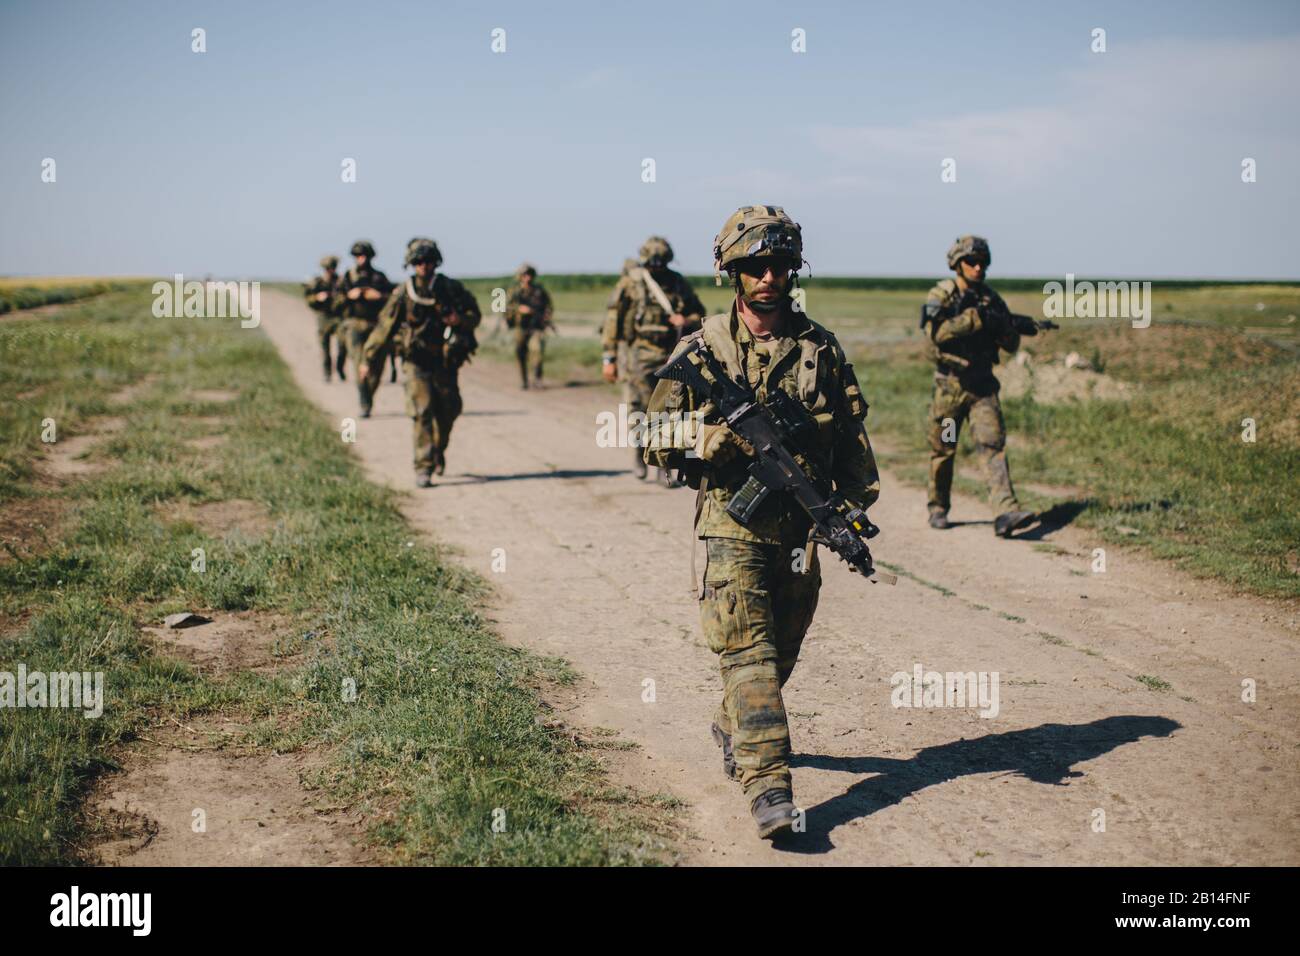 German paratroopers conduct a Joint Forcible Entry during initial operations of Exercise Swift Response 19 at Boboc, Romania, June 14, 2019. Exercise Swift Response 19 is an annual U.S. Army Europe led multinational airborne exercise being conducted in Bulgaria, Croatia and Romania with participating armed forces from France, Germany, Italy, Netherlands, Spain and the United Kingdom. Swift Response provides a vital joint training opportunity that allows command and control of complex operations from dispersed locations while ensuring that participating forces work together seamlessly to bring Stock Photo